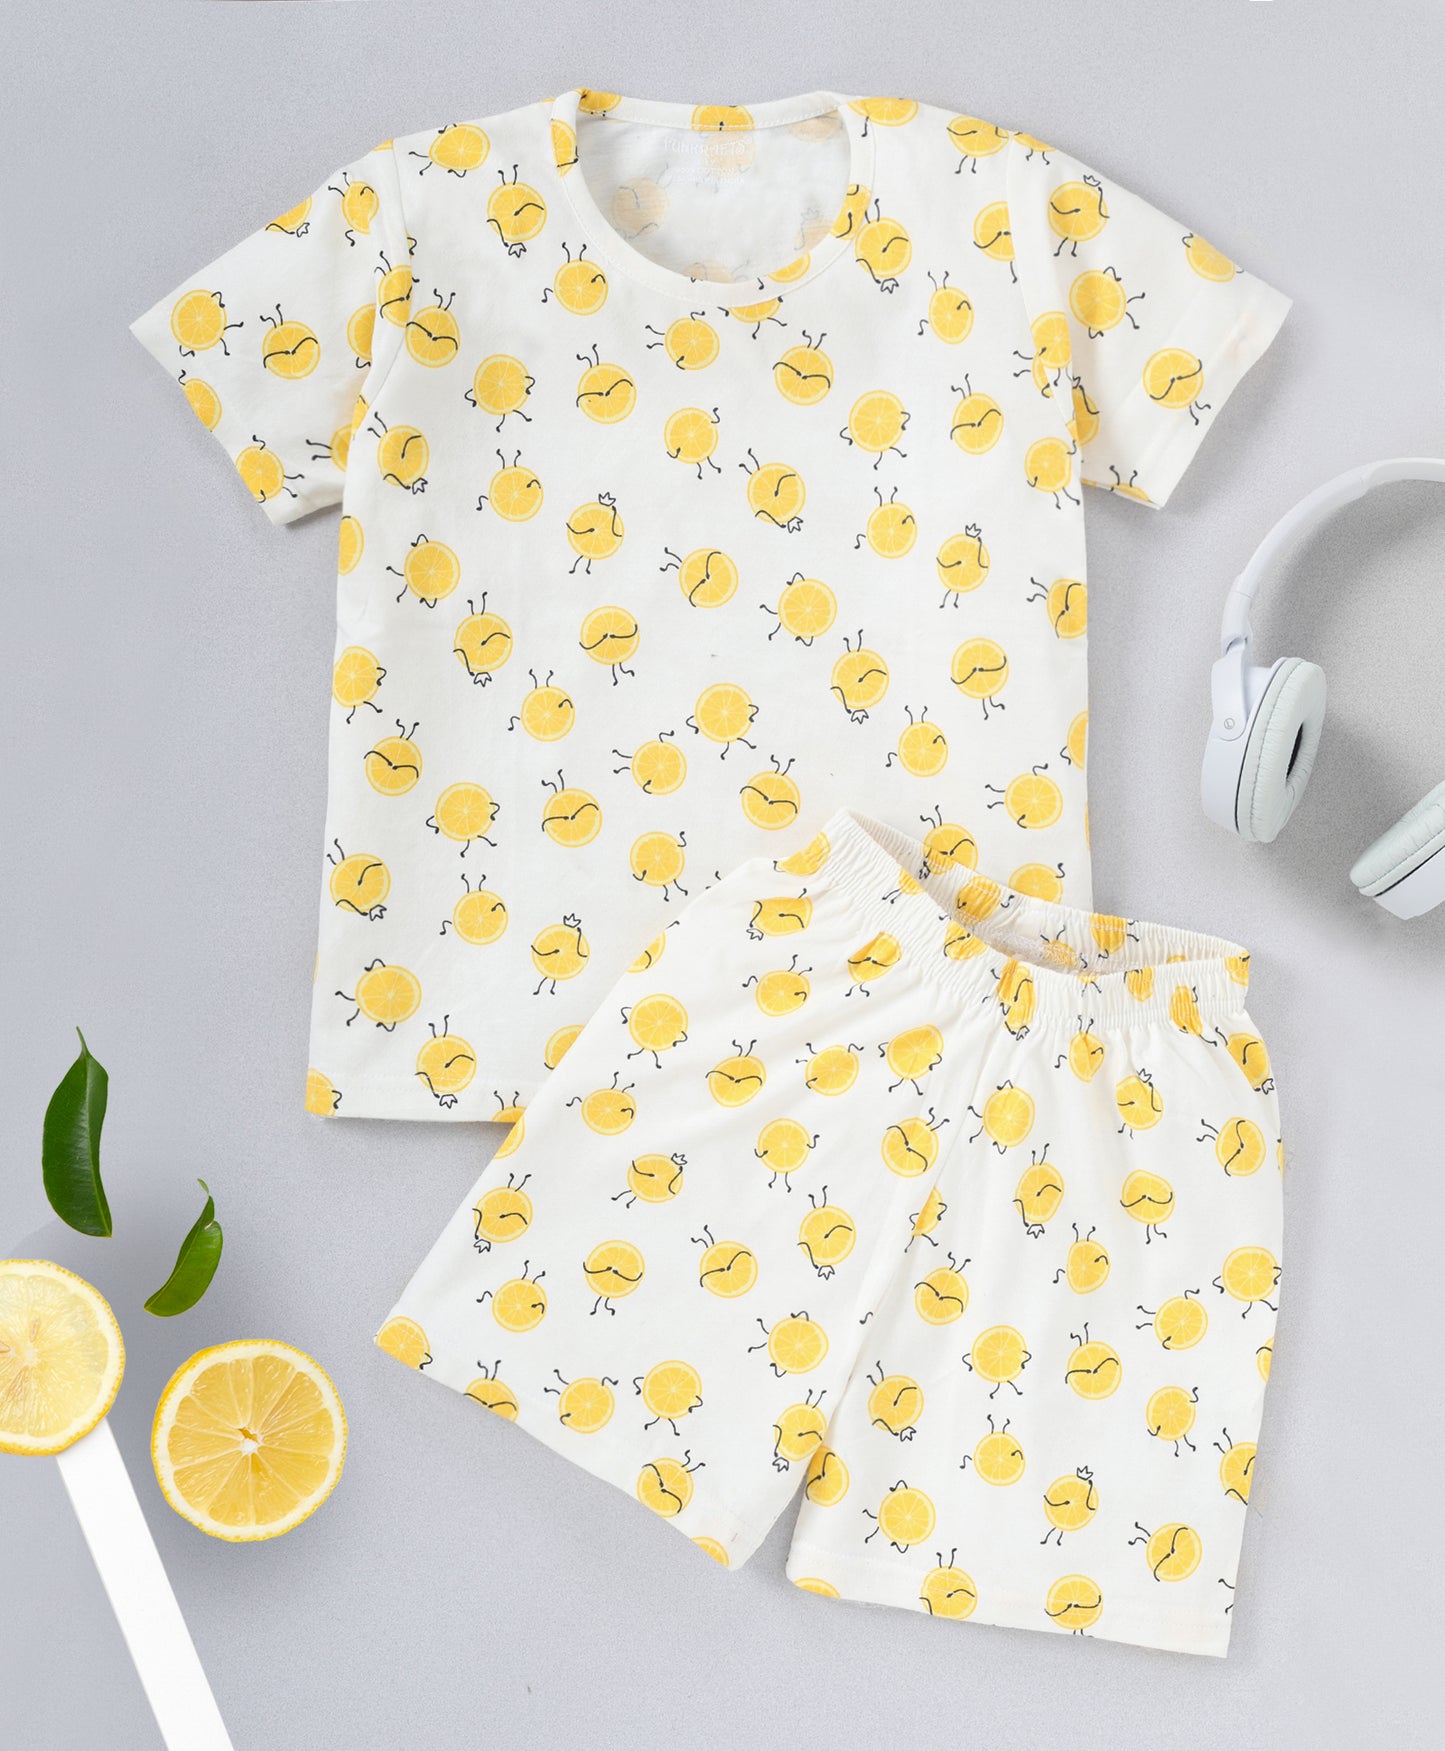 White & Yellow Pure Cotton Half Sleeves Heart & Lemon Printed Shorts Set for Girls - Pack of 2